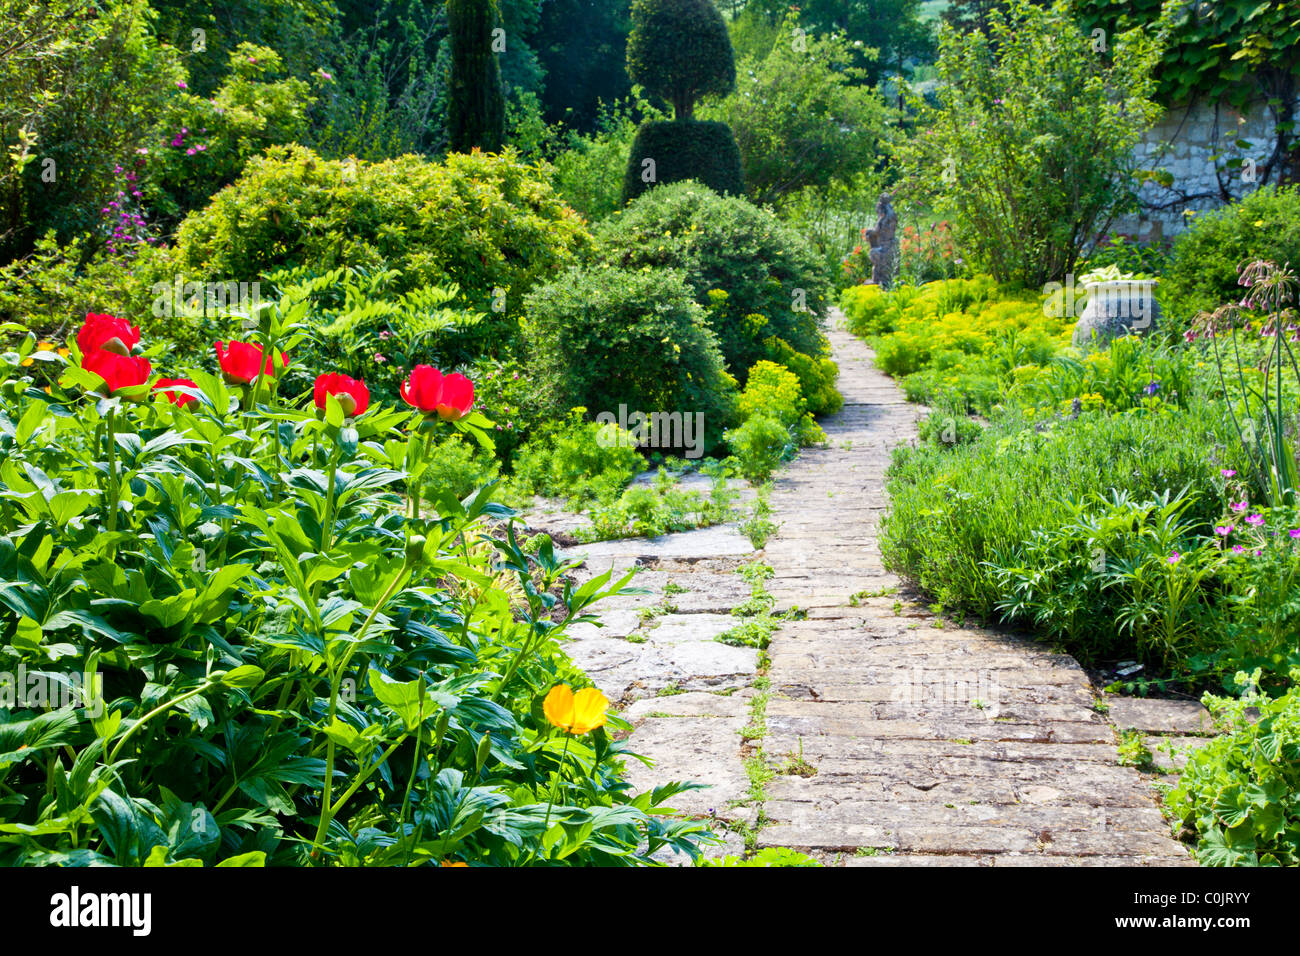 A paved garden path between shrub and flower borders in an English country garden in summer Stock Photo